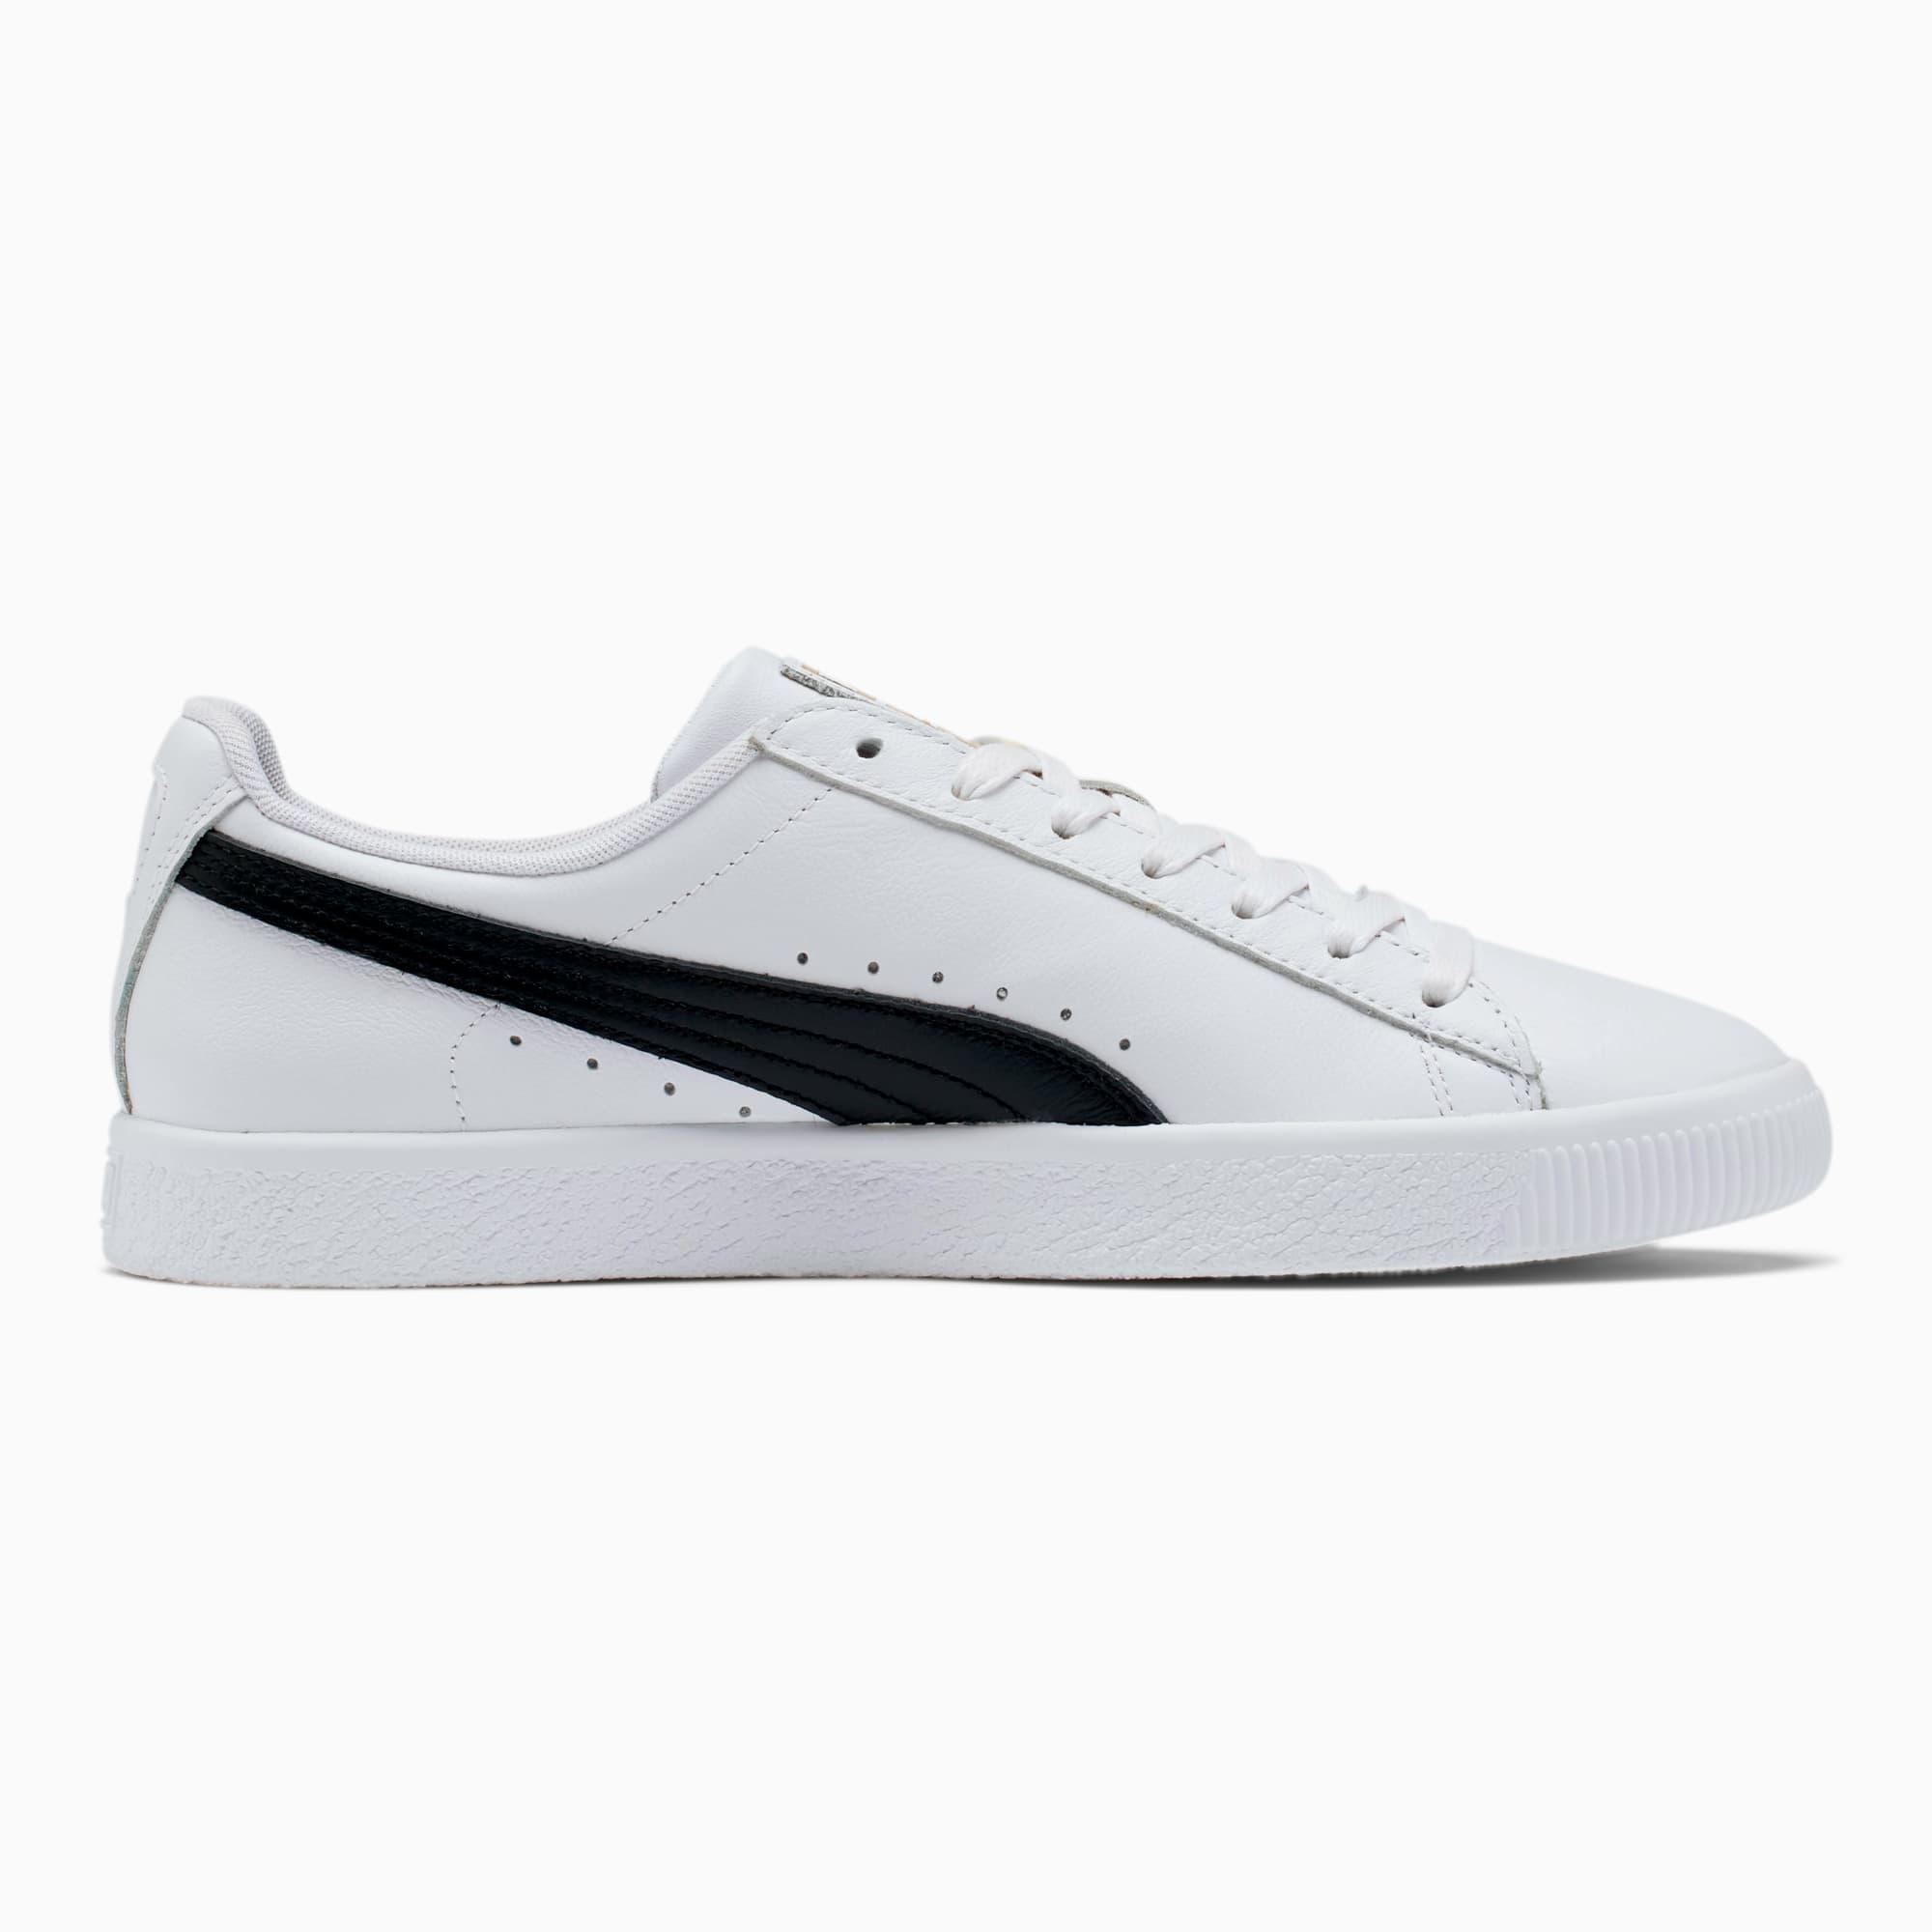 PUMA Clyde Core Foil Men's Sneakers in 01 (White) for Men - Save 21% - Lyst